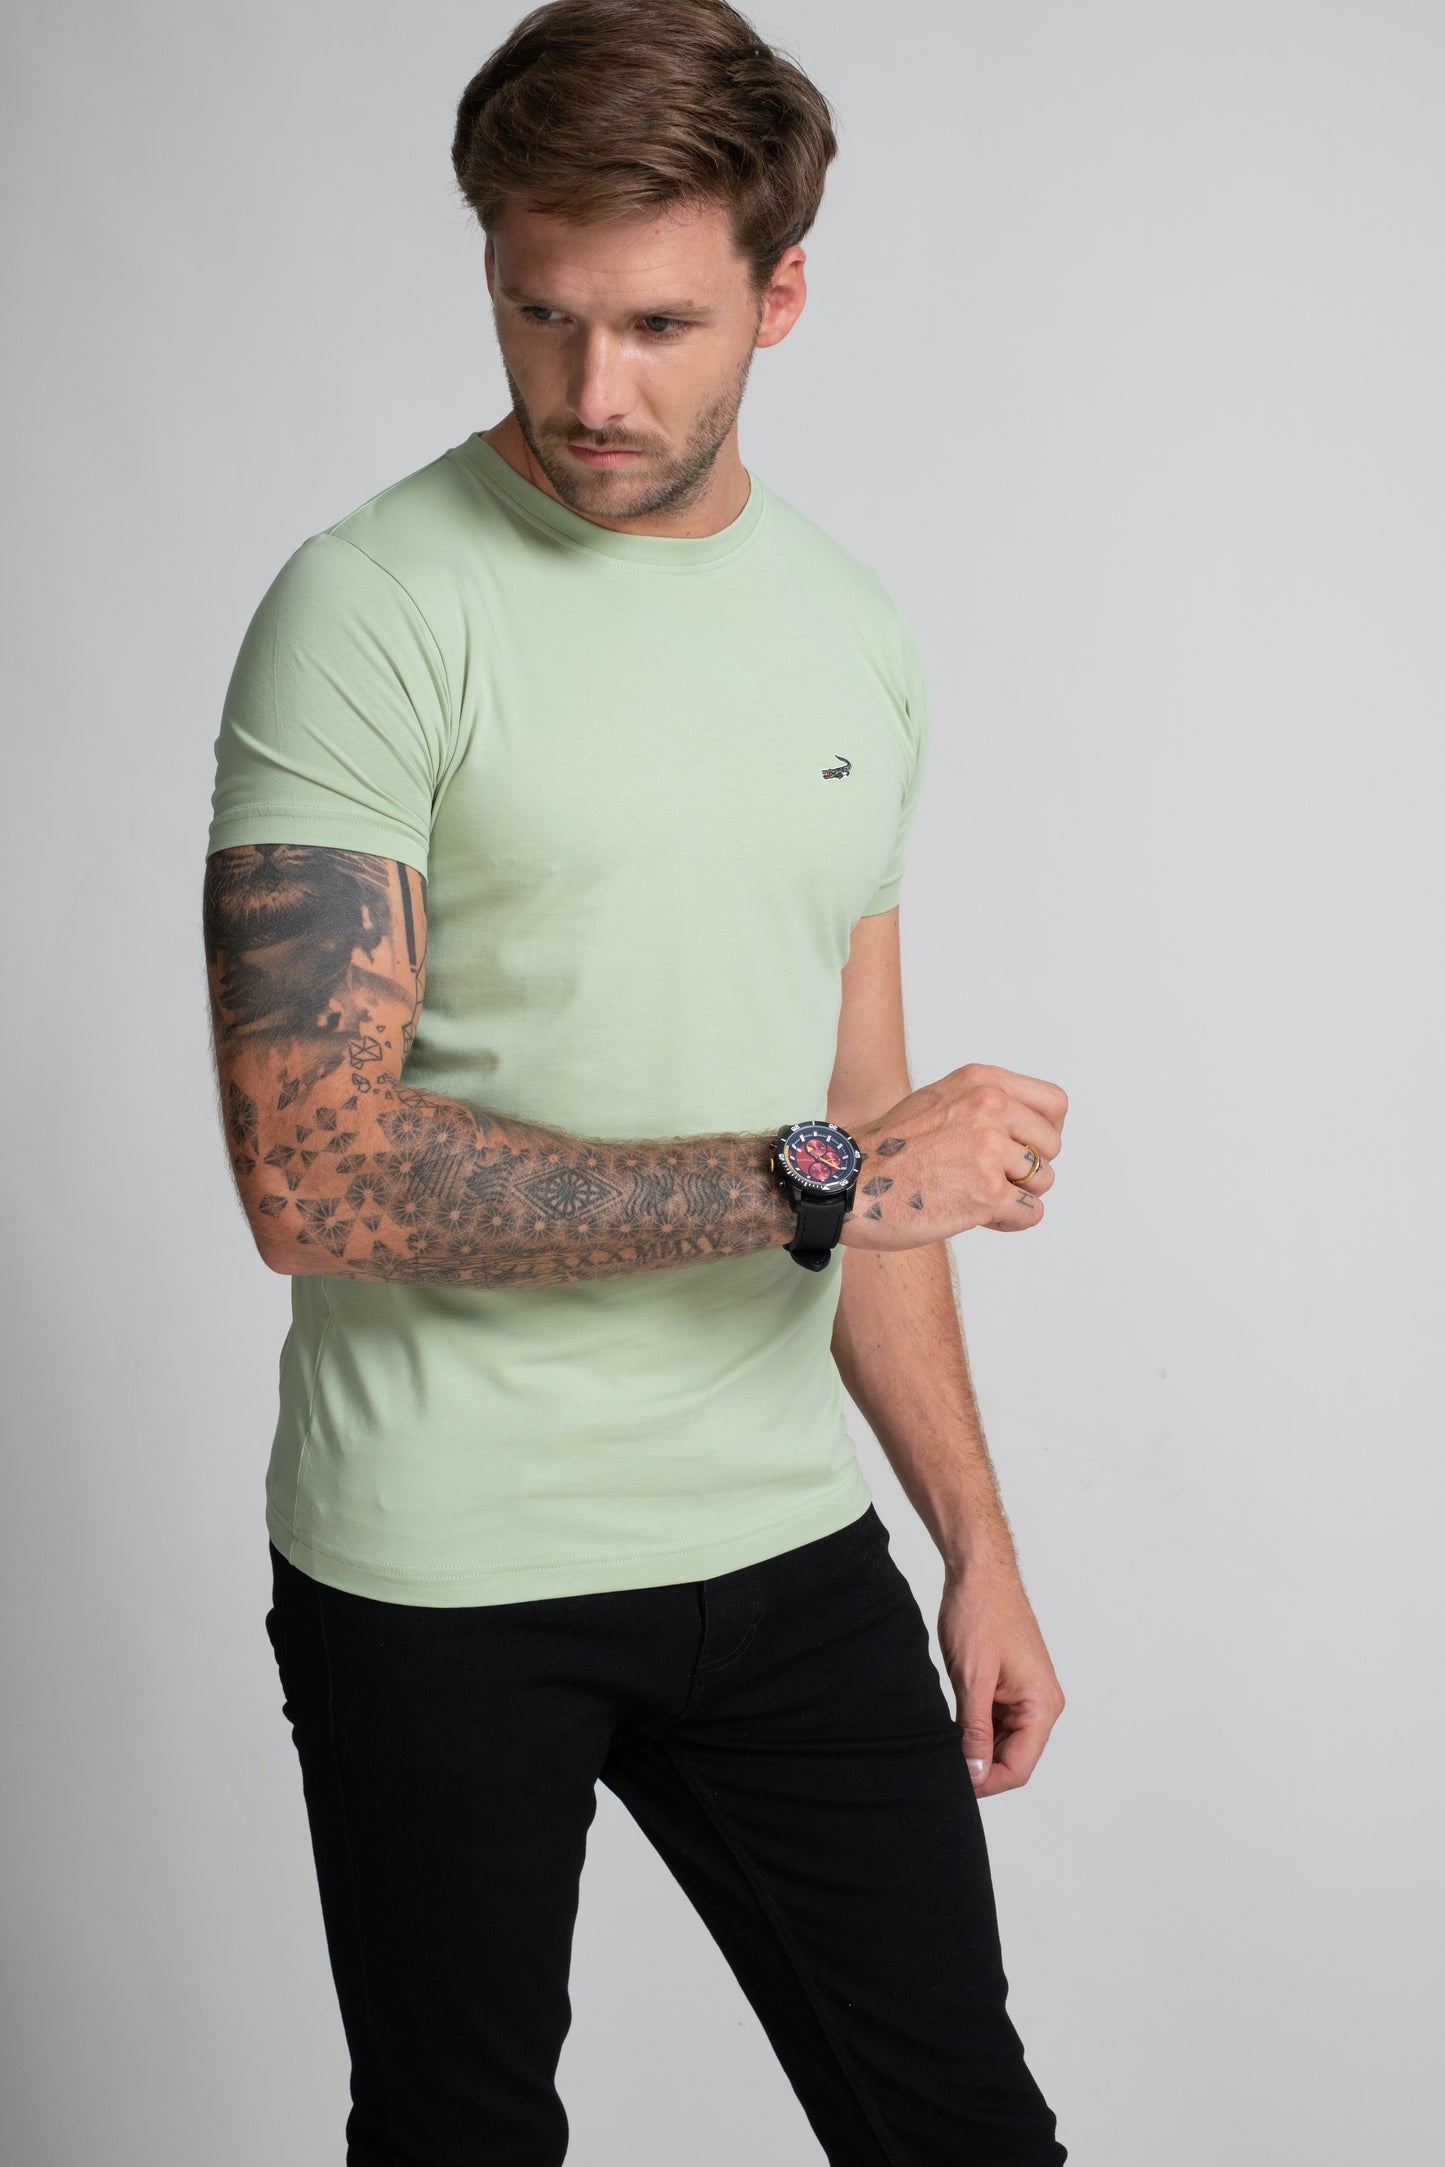 Action Fit Short sleeves-CasualCrew Neck - GreenMeadow